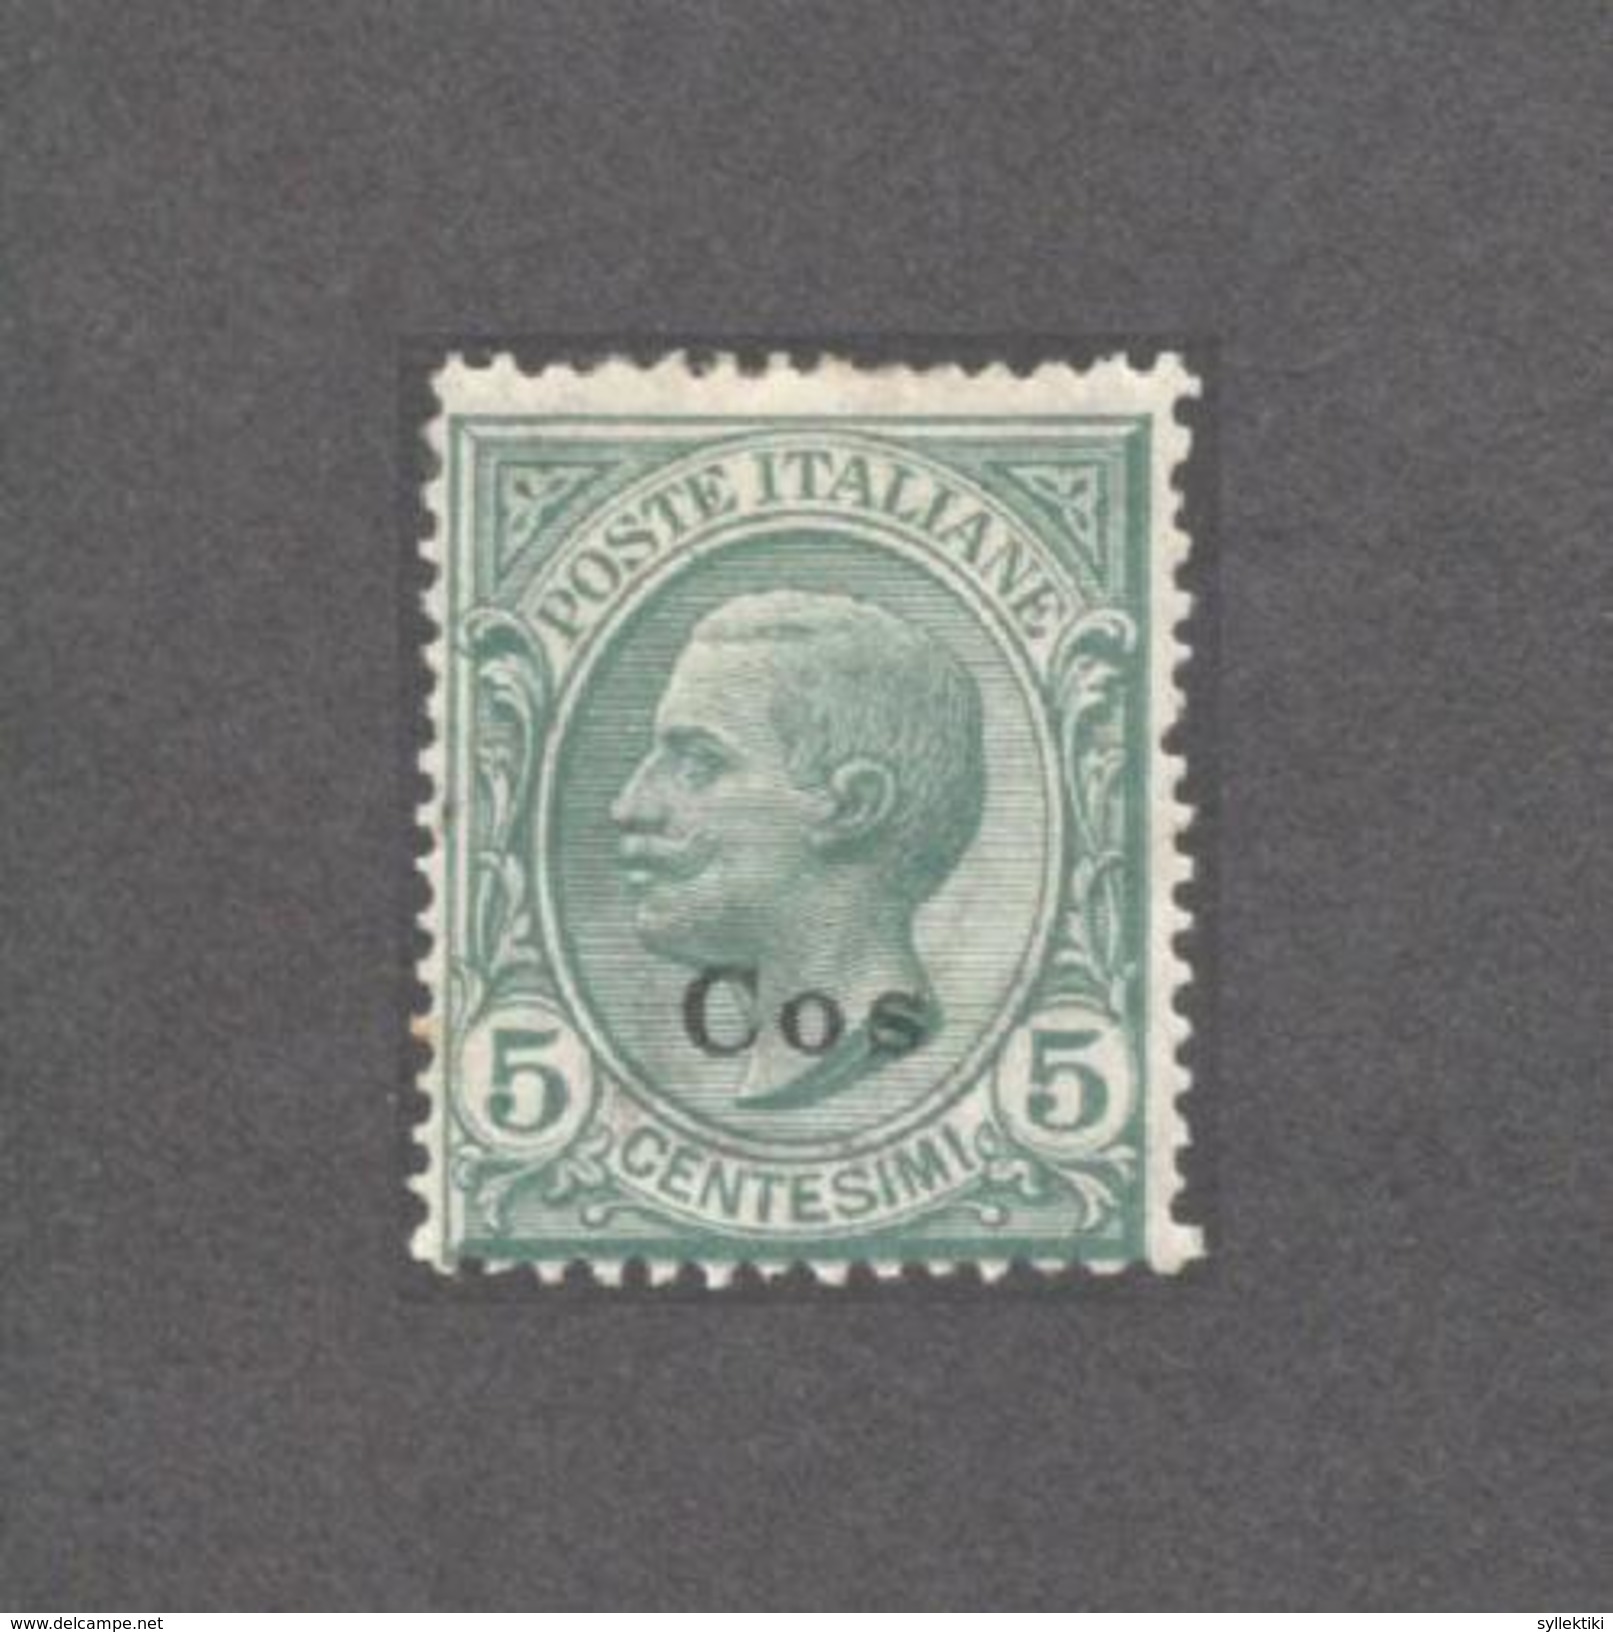 GREECE 1912 COS OVERPRINT ON ITALIAN STAMP 5cents MH - Unclassified